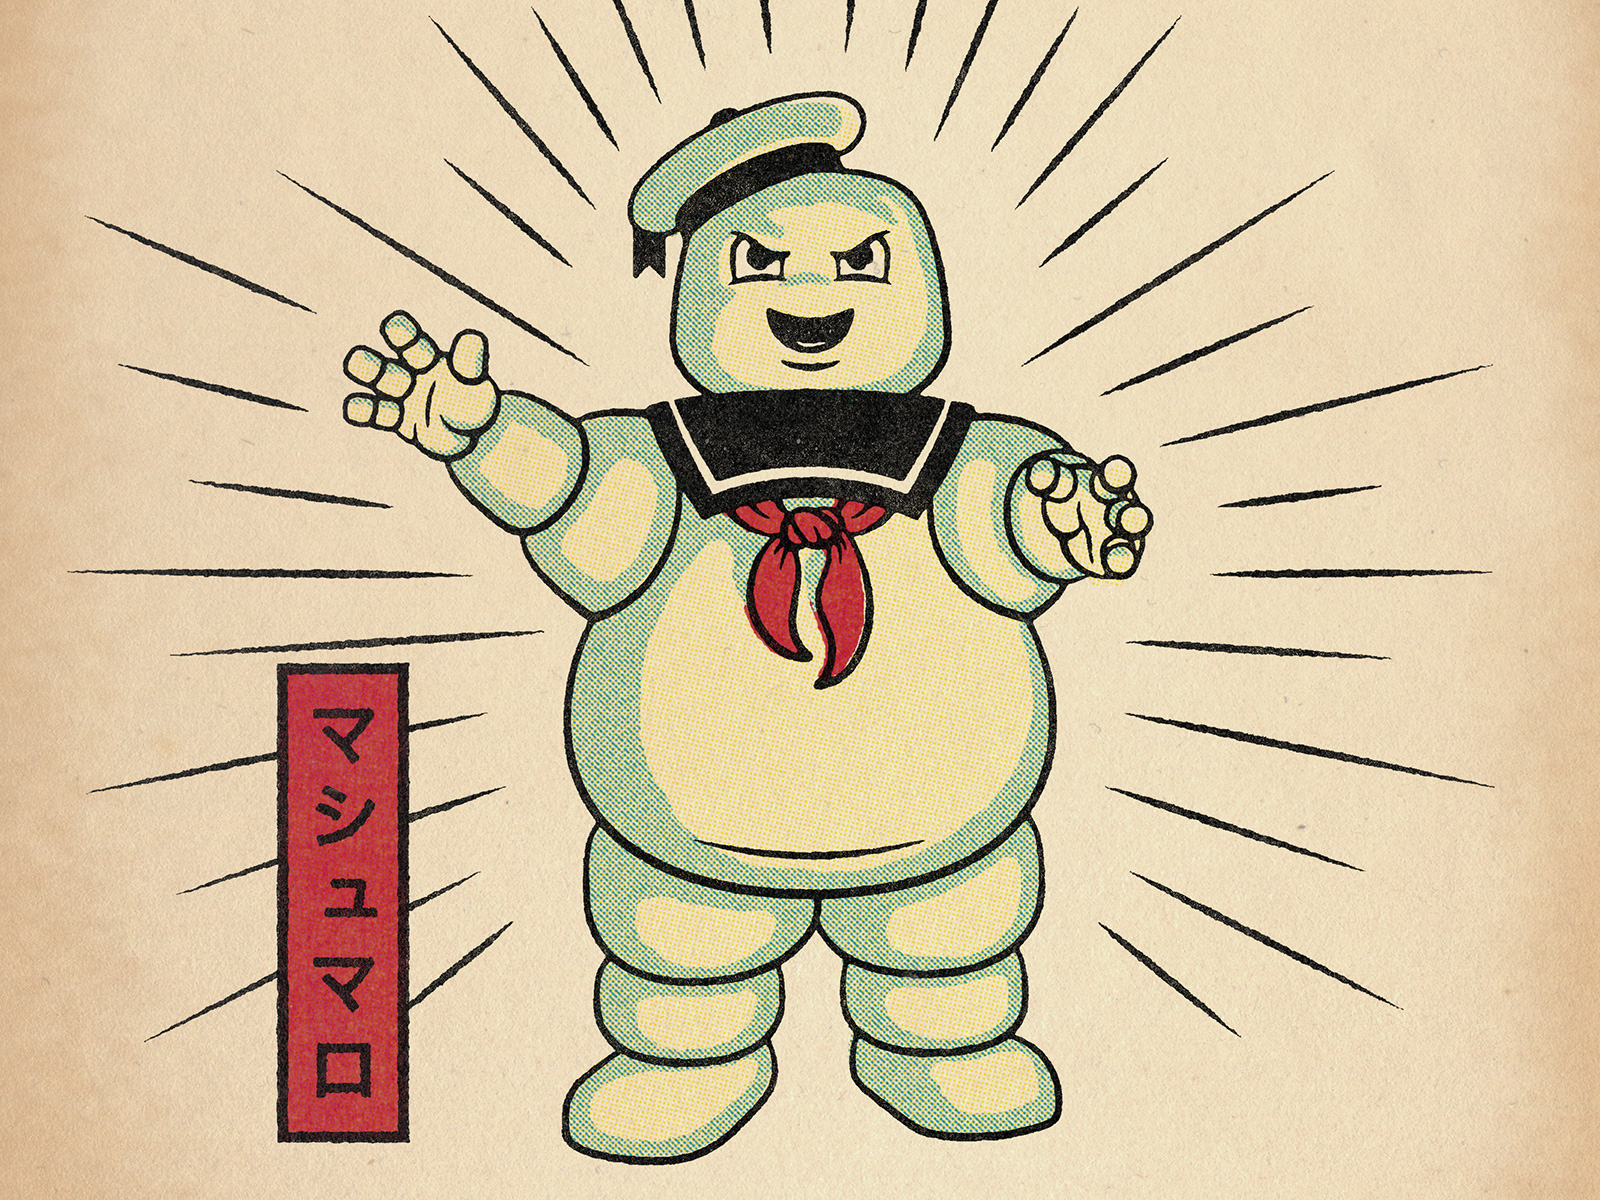 Stay Puft Marshmallow Man by Jared Shofner on Dribbble